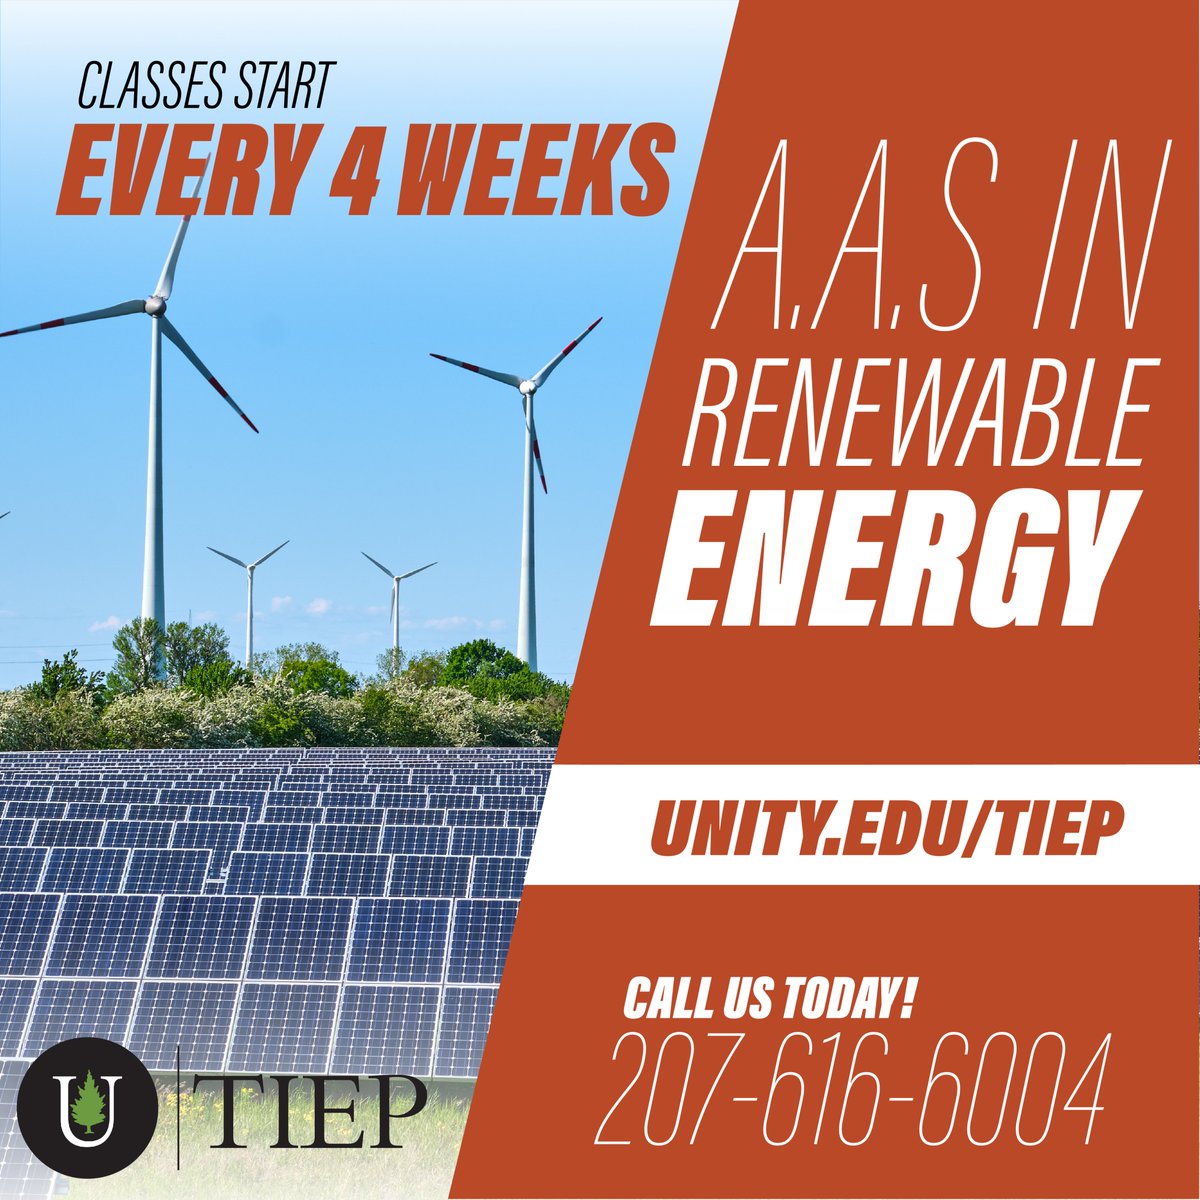 Did you know employment in Renewable Energy fields is expected to grow at an average of 15% from 2020-2030, according to the Bureau of Labor Statistics (BLS)?

Learn more about our renewable energy program at unity.edu/programs/renew…

#renewableenergy #mainejobs #renewable